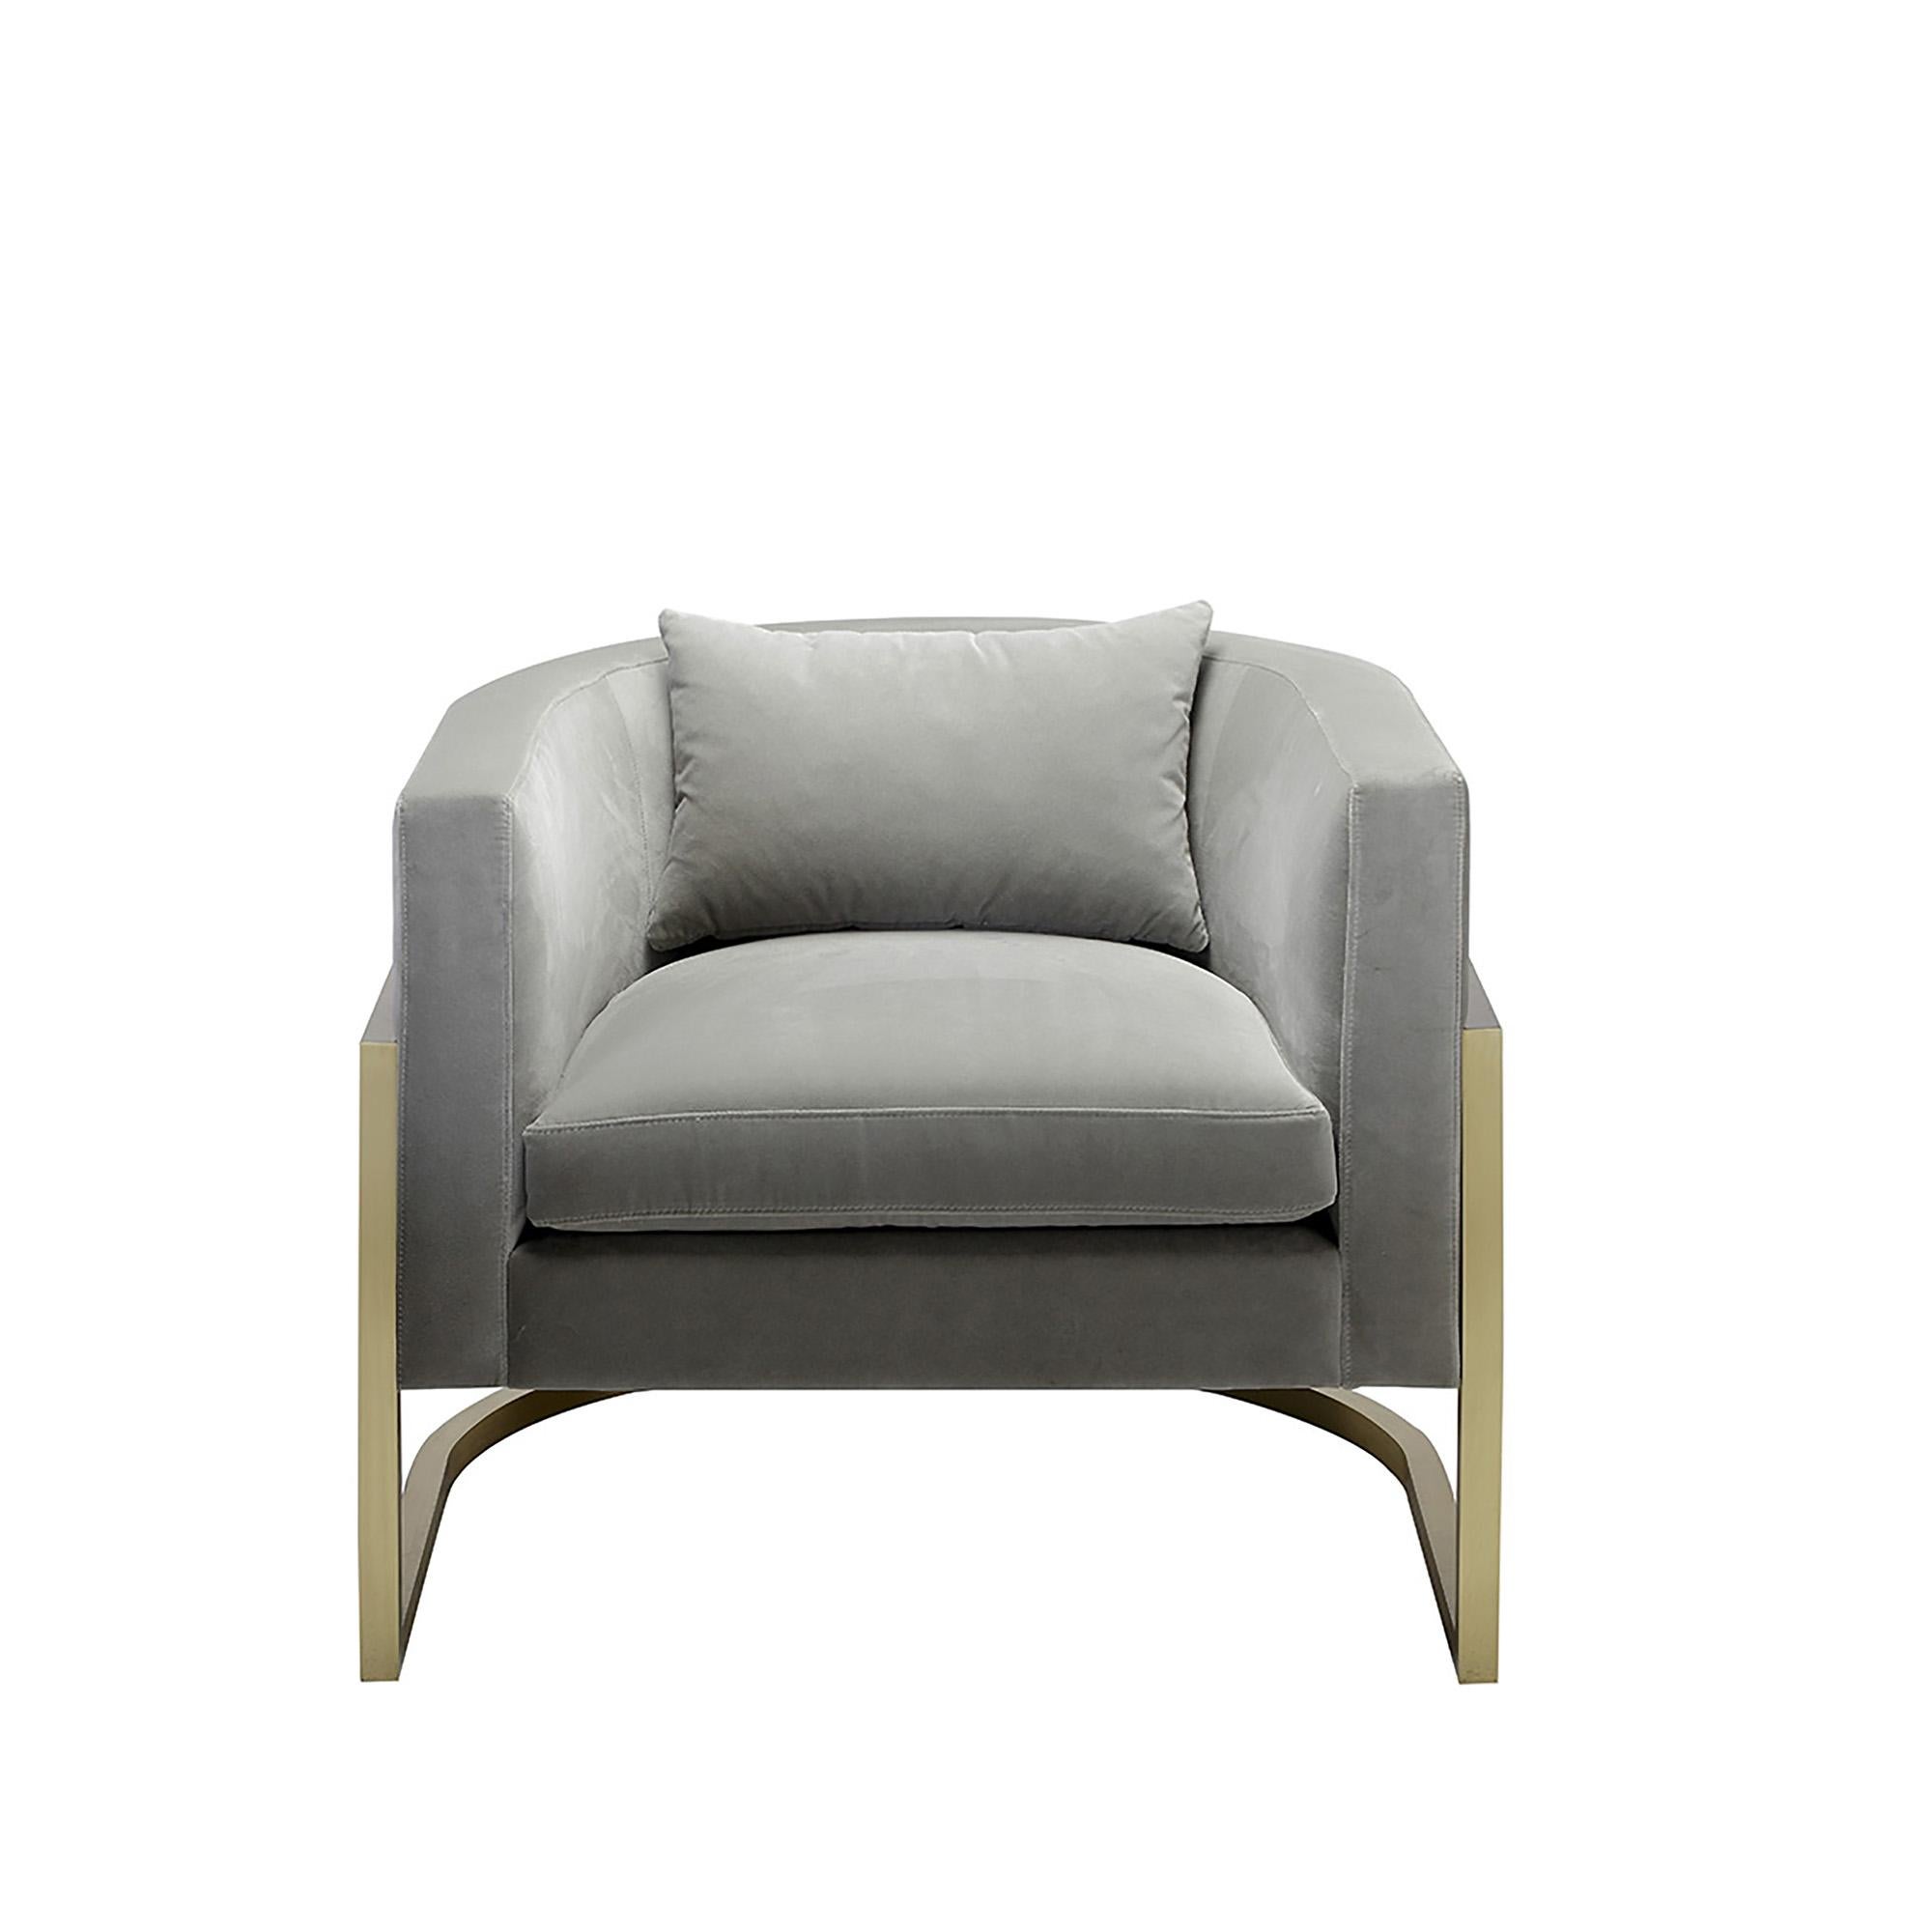 Brass Julius Armchair by Duistt
Dimensions: W 86 x D 84 x H 70 cm
Materials: Duistt Fabric, Brass

The JULIUS brass armchair, crafted with great attention to detail, gives us clean and modern lines always with a strong craftsmanship presence like